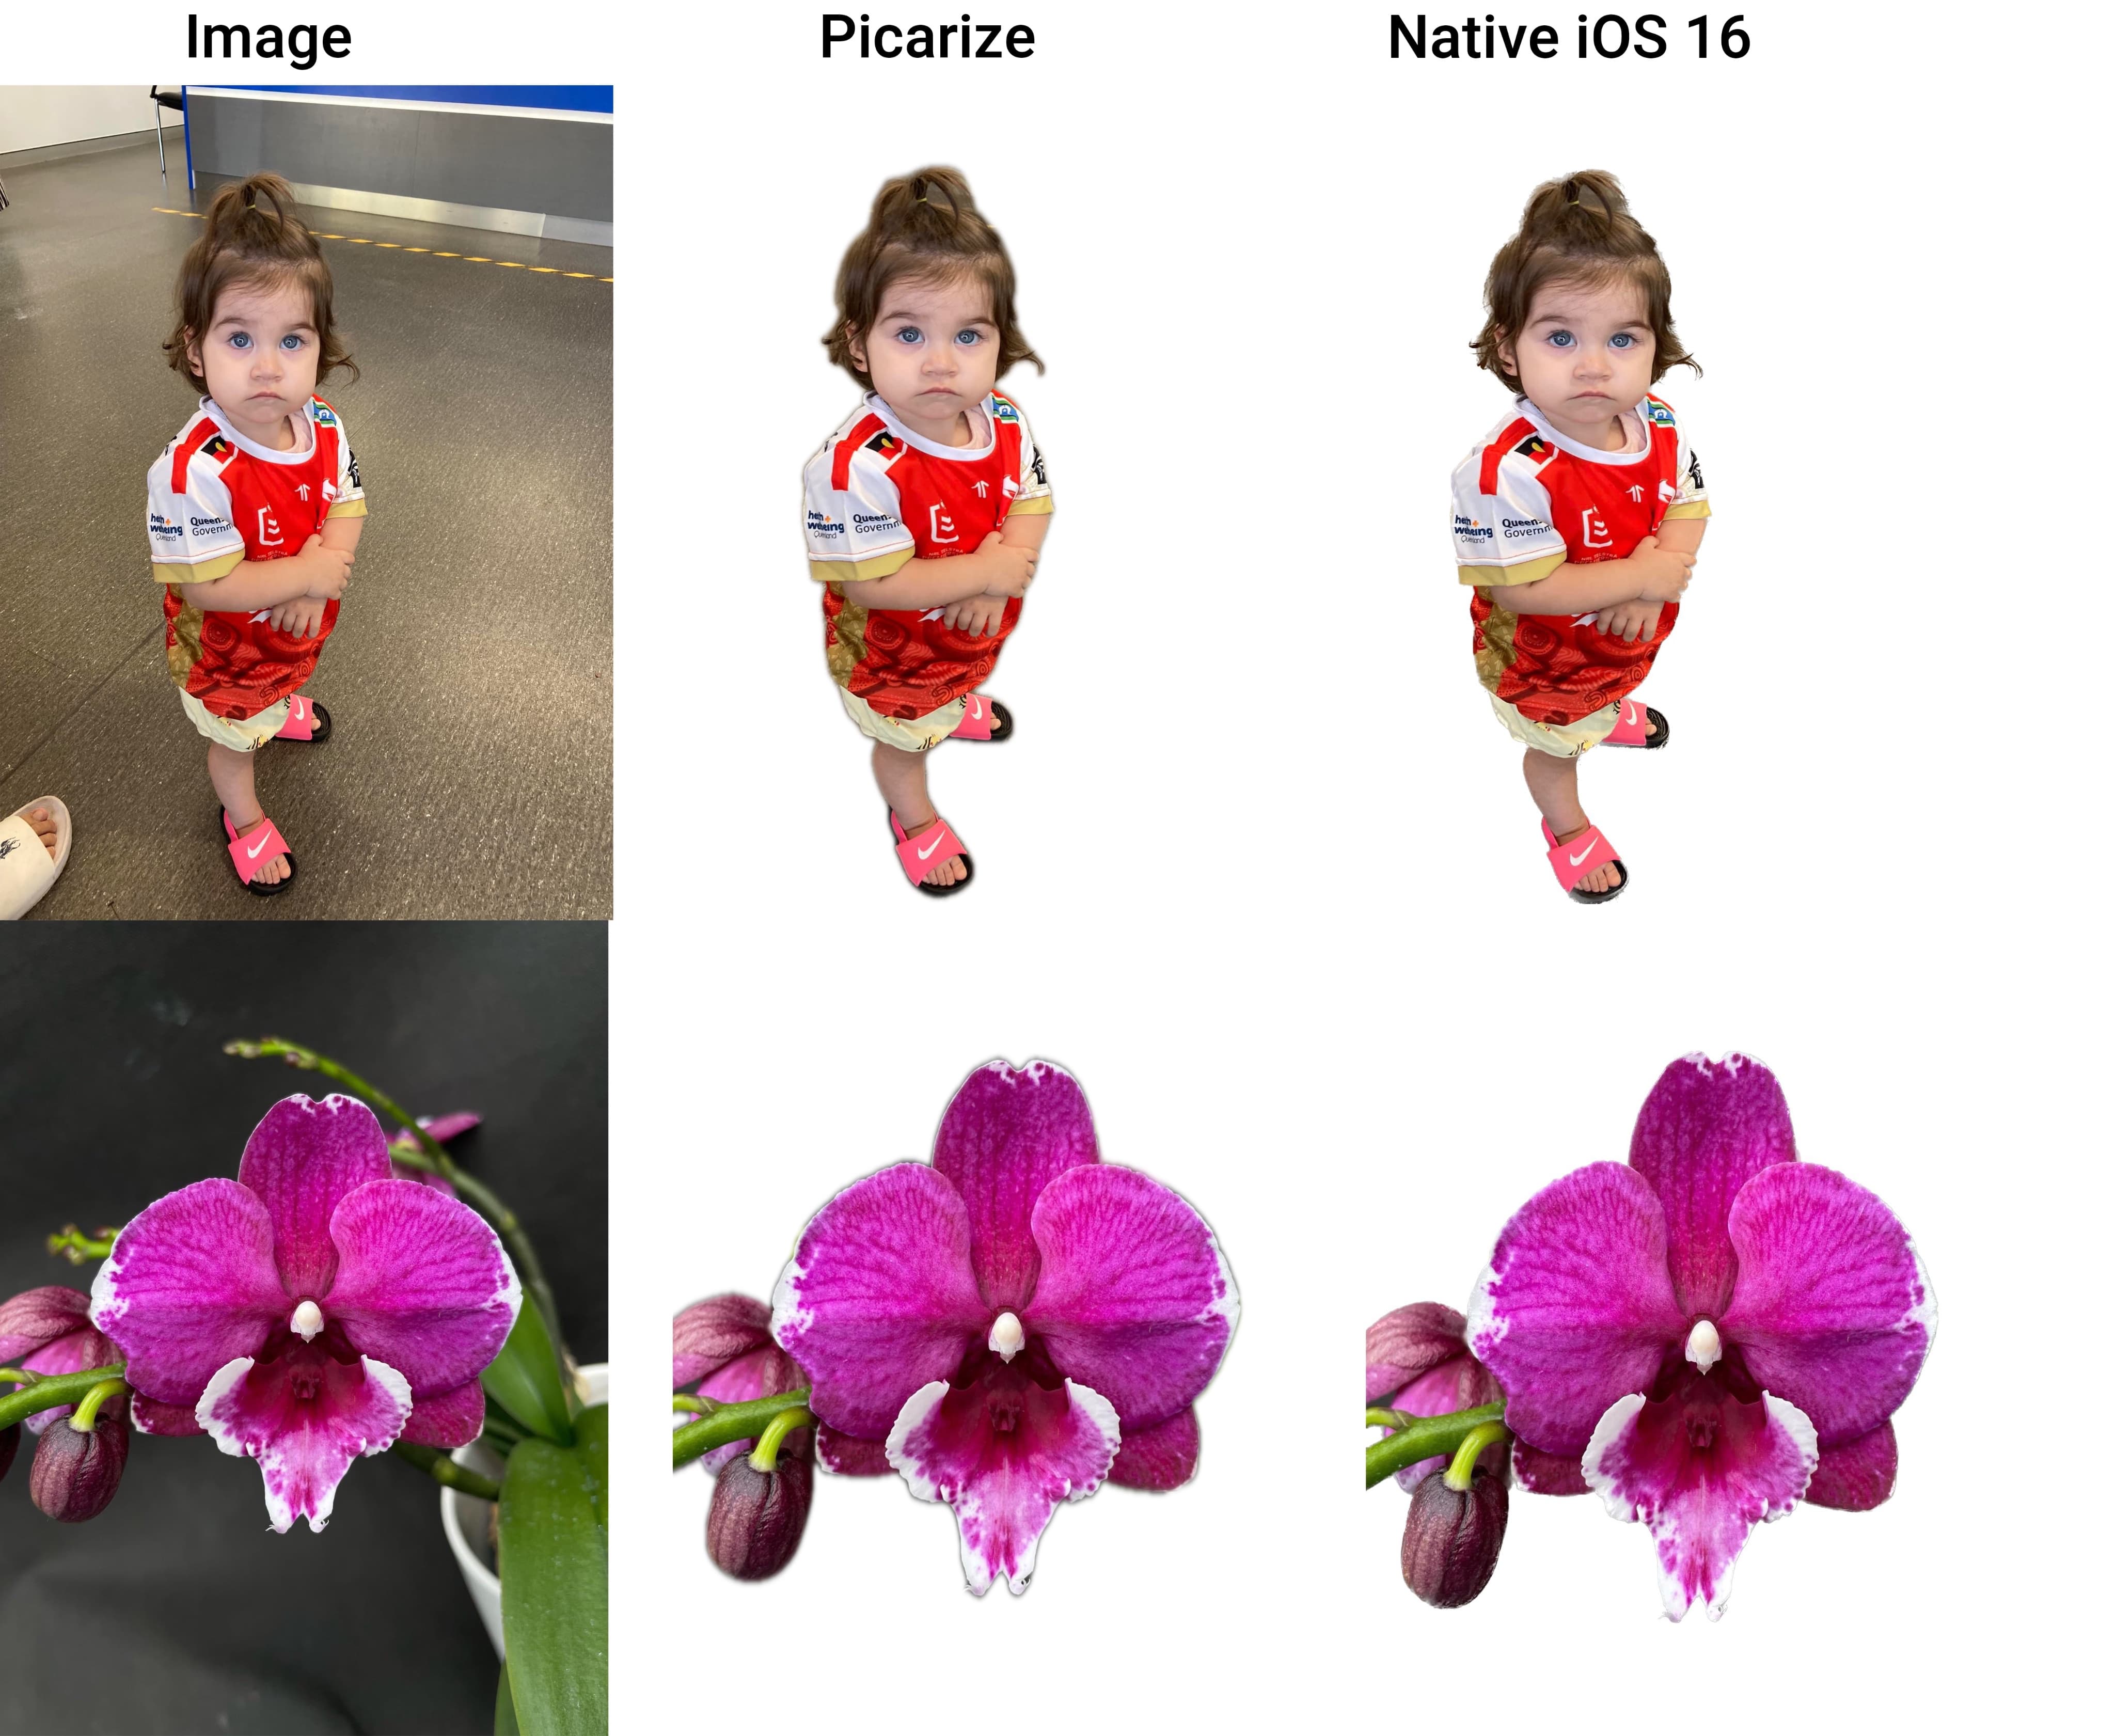 Picarize examples compared to iOS 16 native subject isolation.